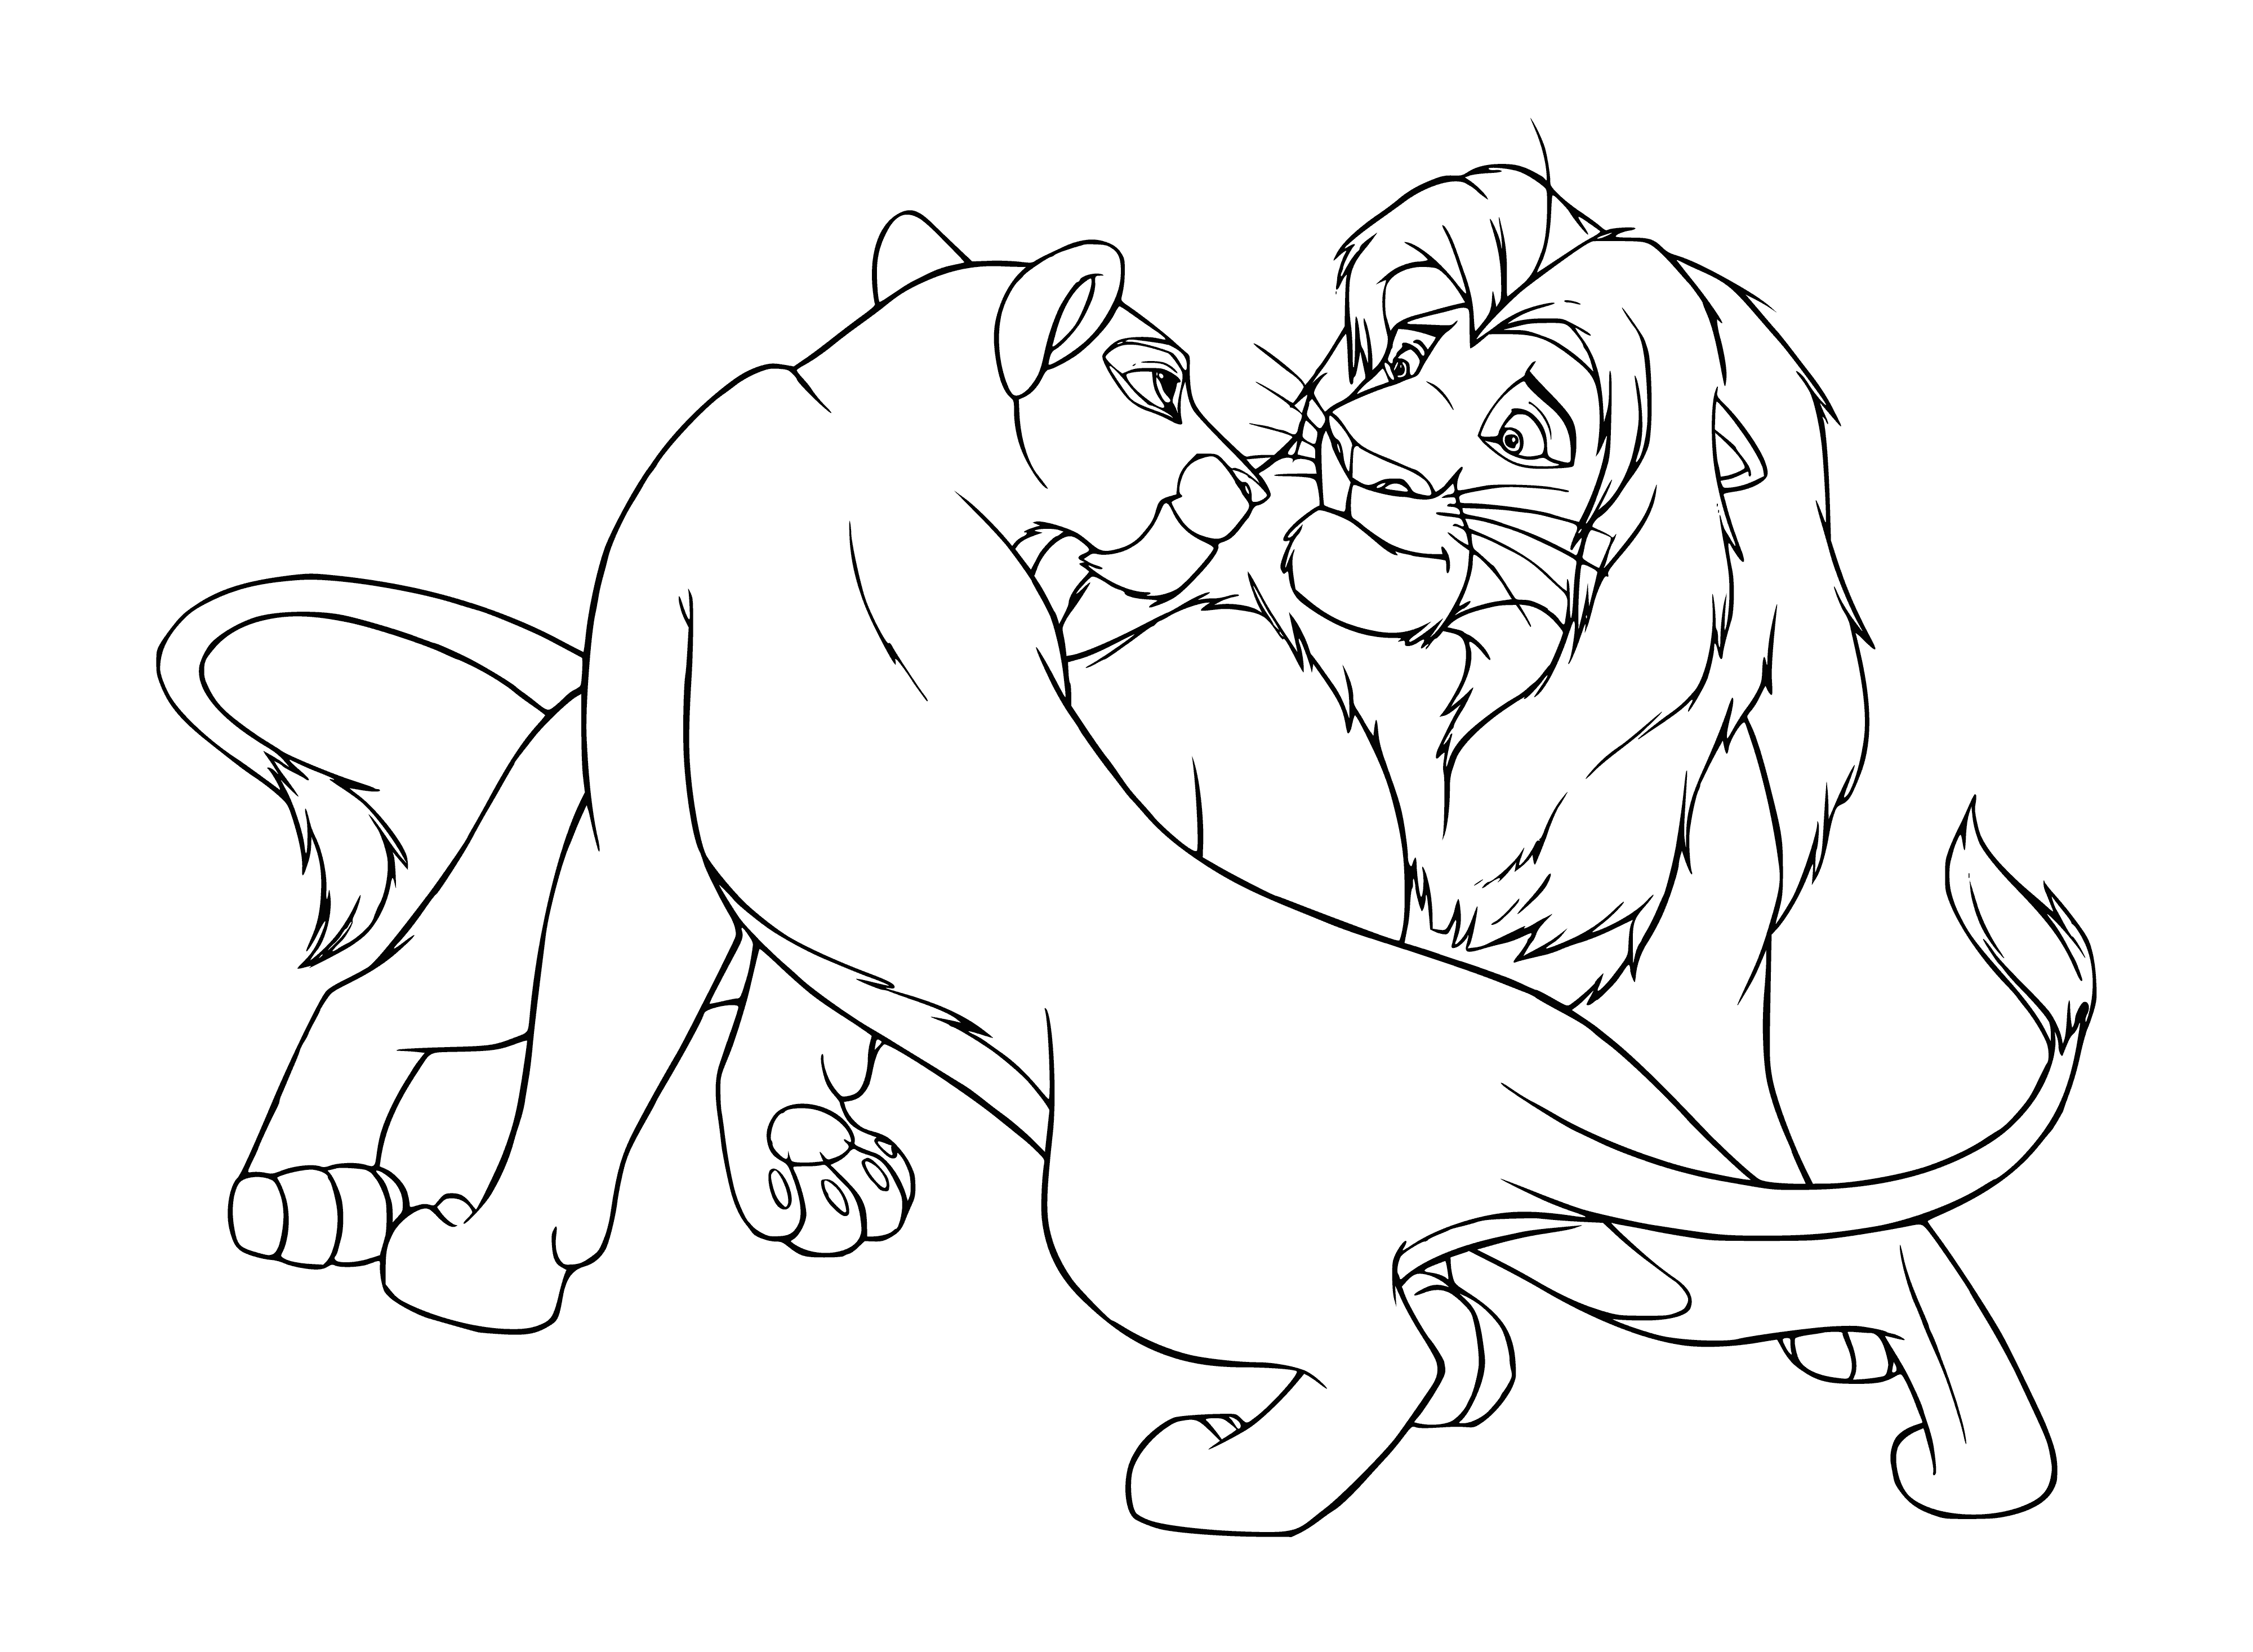 coloring page: Simba & Nala stand together, united, on a rock in serene harmony, in the savannah of adulthood. #LionKing